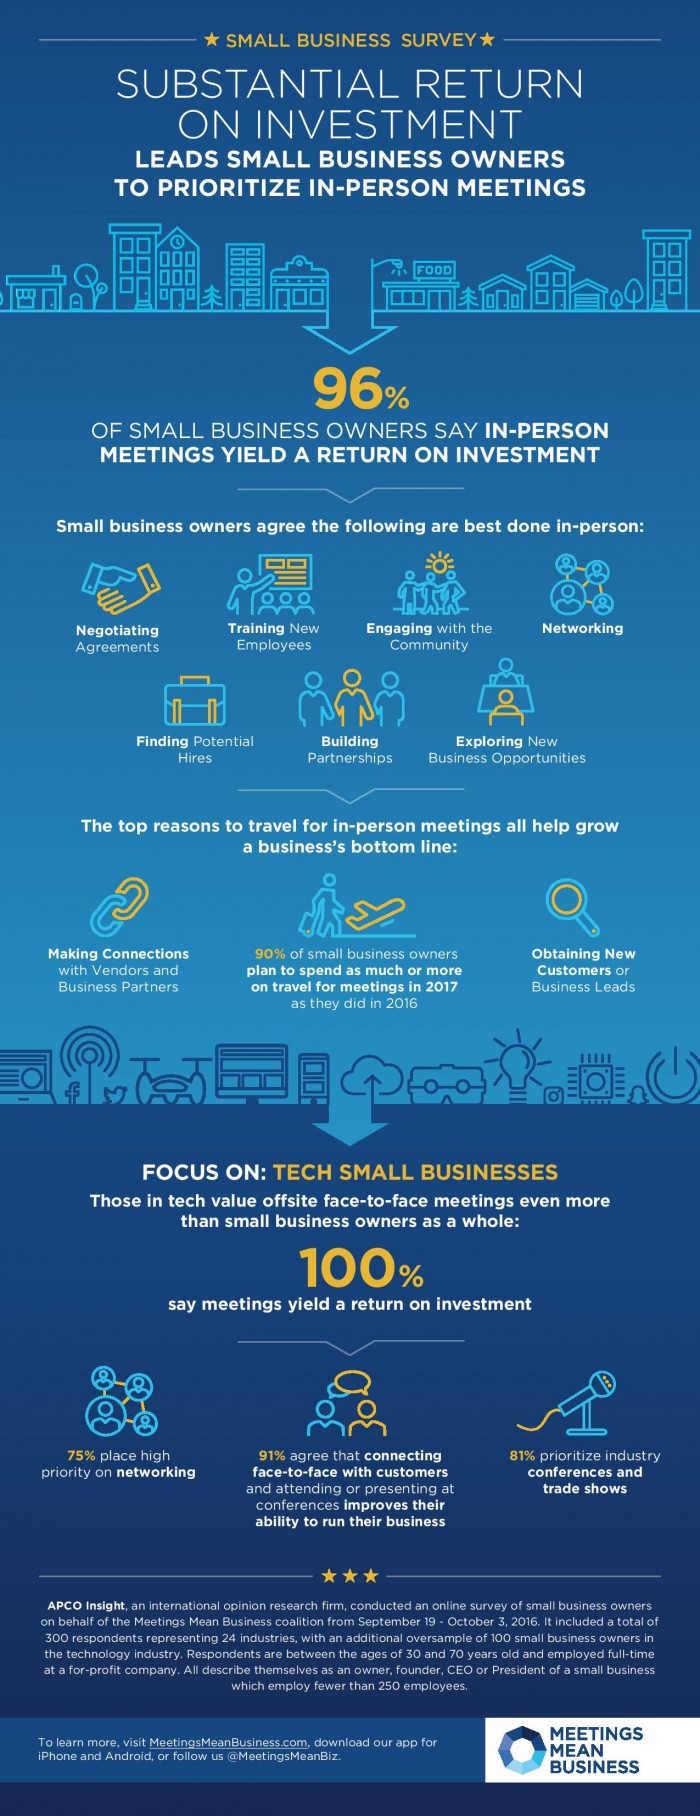 New Survey: Why Small Businesses Rely on Face-to-Face Meetings - News